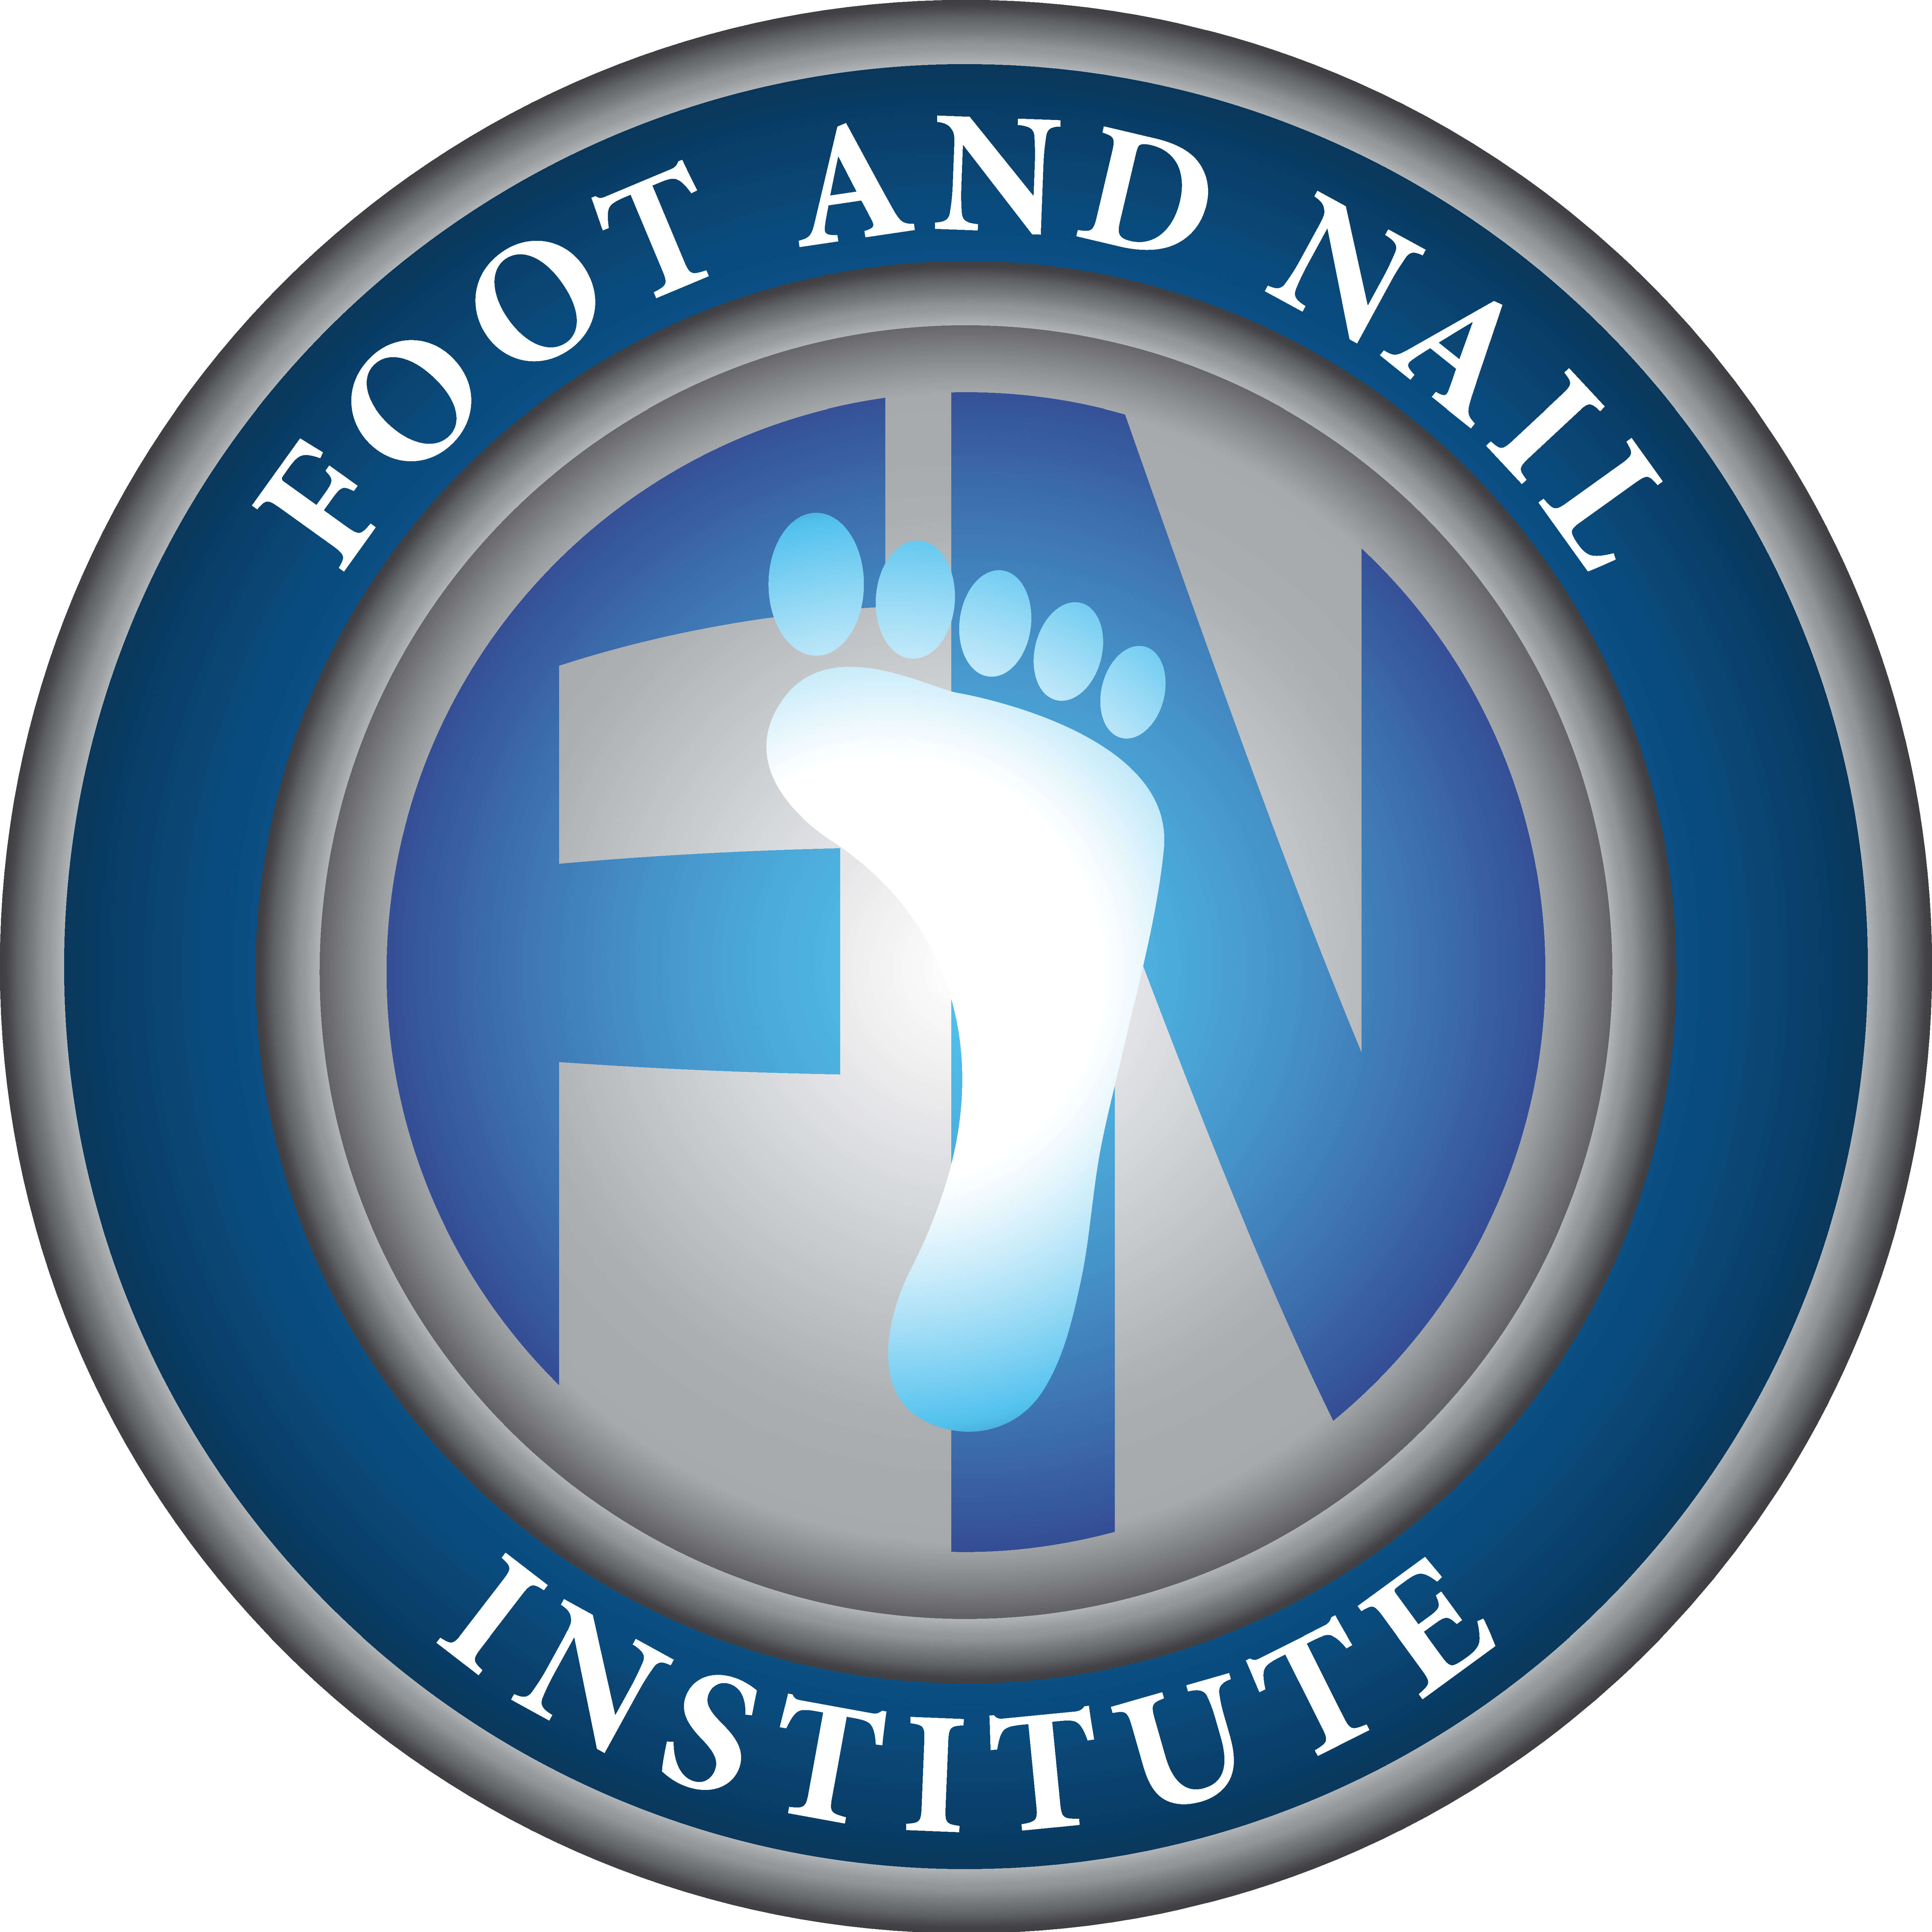 Foot and Nail Institute Fills the Gap in Senior Foot Care Services